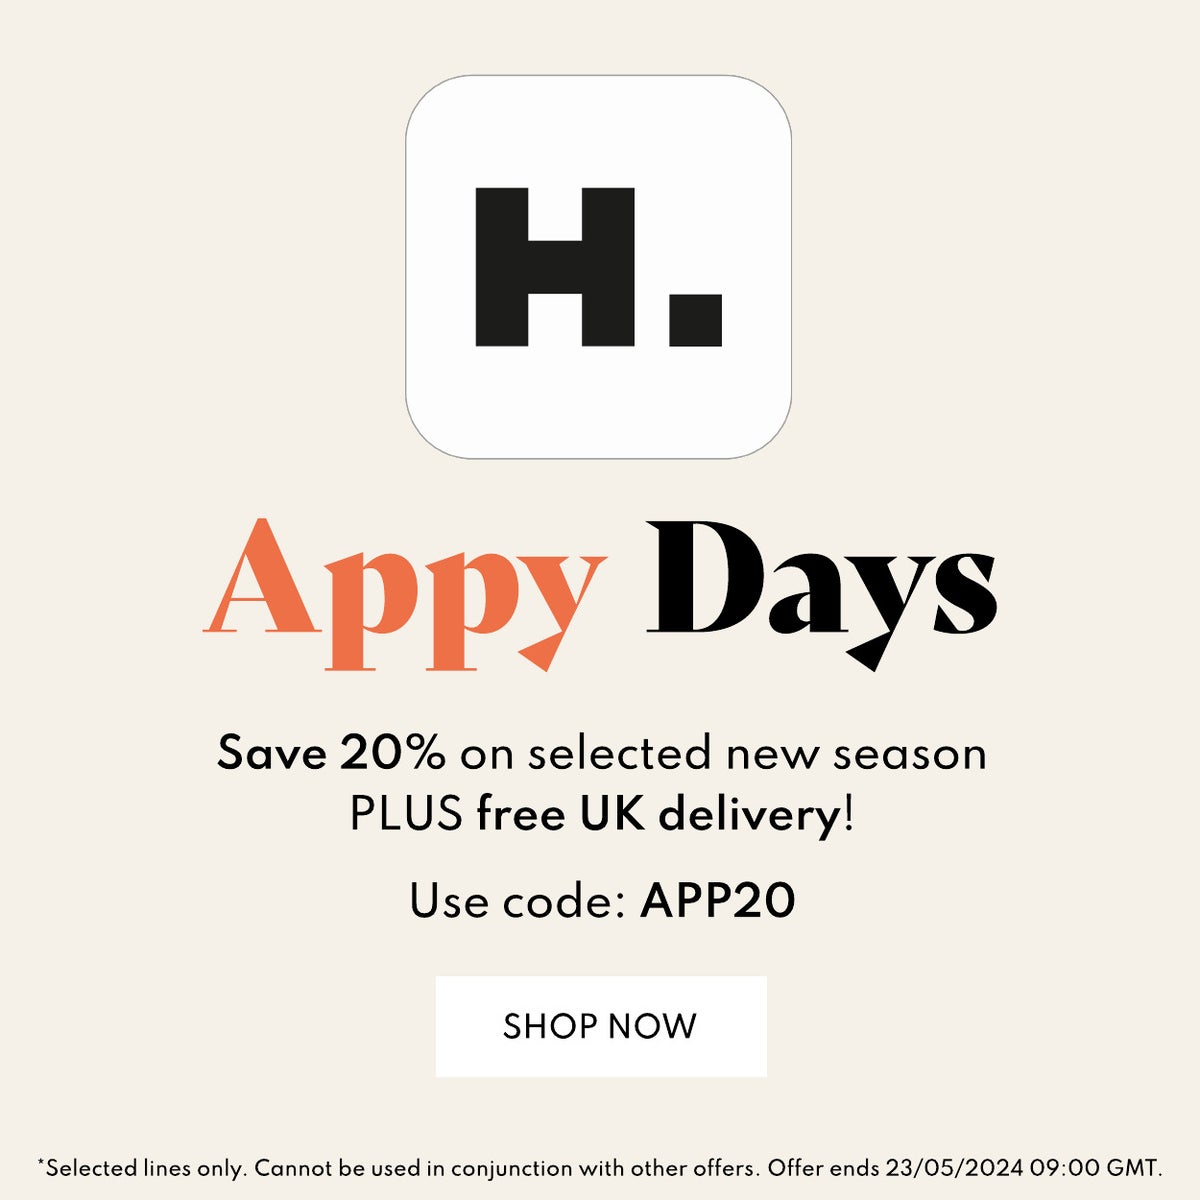 App Exclusive: 20% off + free UK delivery